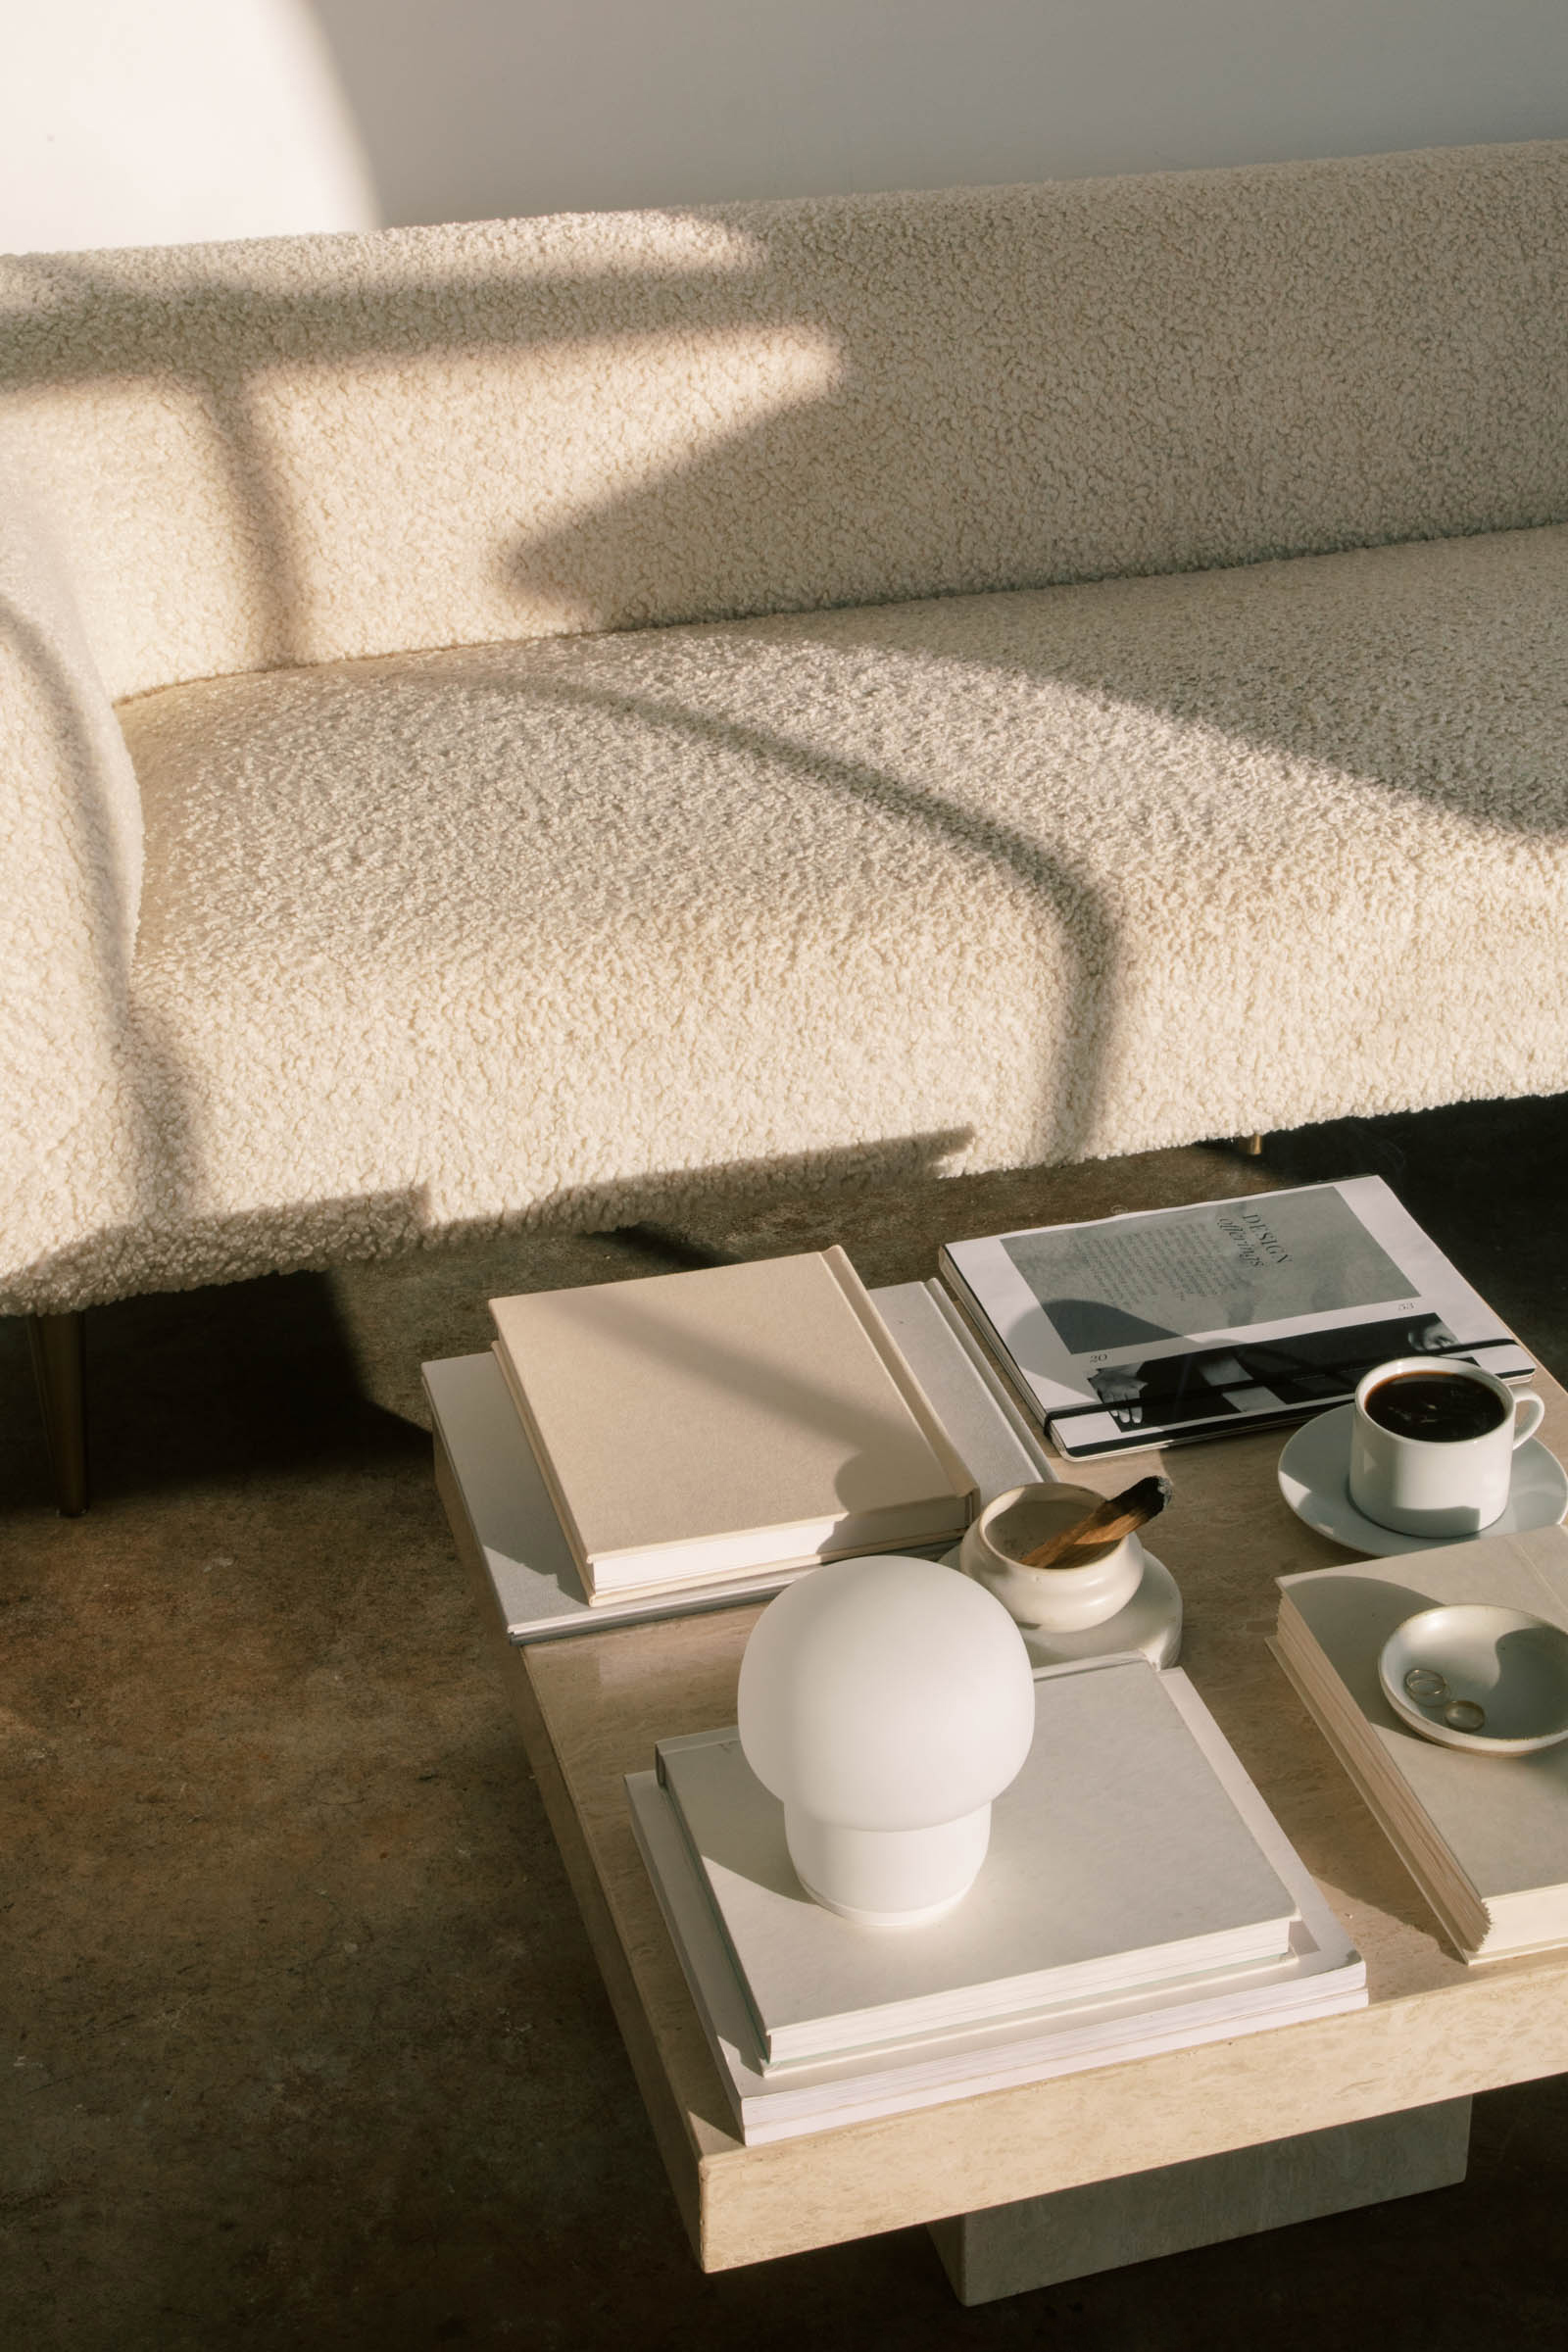 living-room-with-styled-coffee-table-and-soft-natural-light-cream-colored-sofa-with-soft-texture